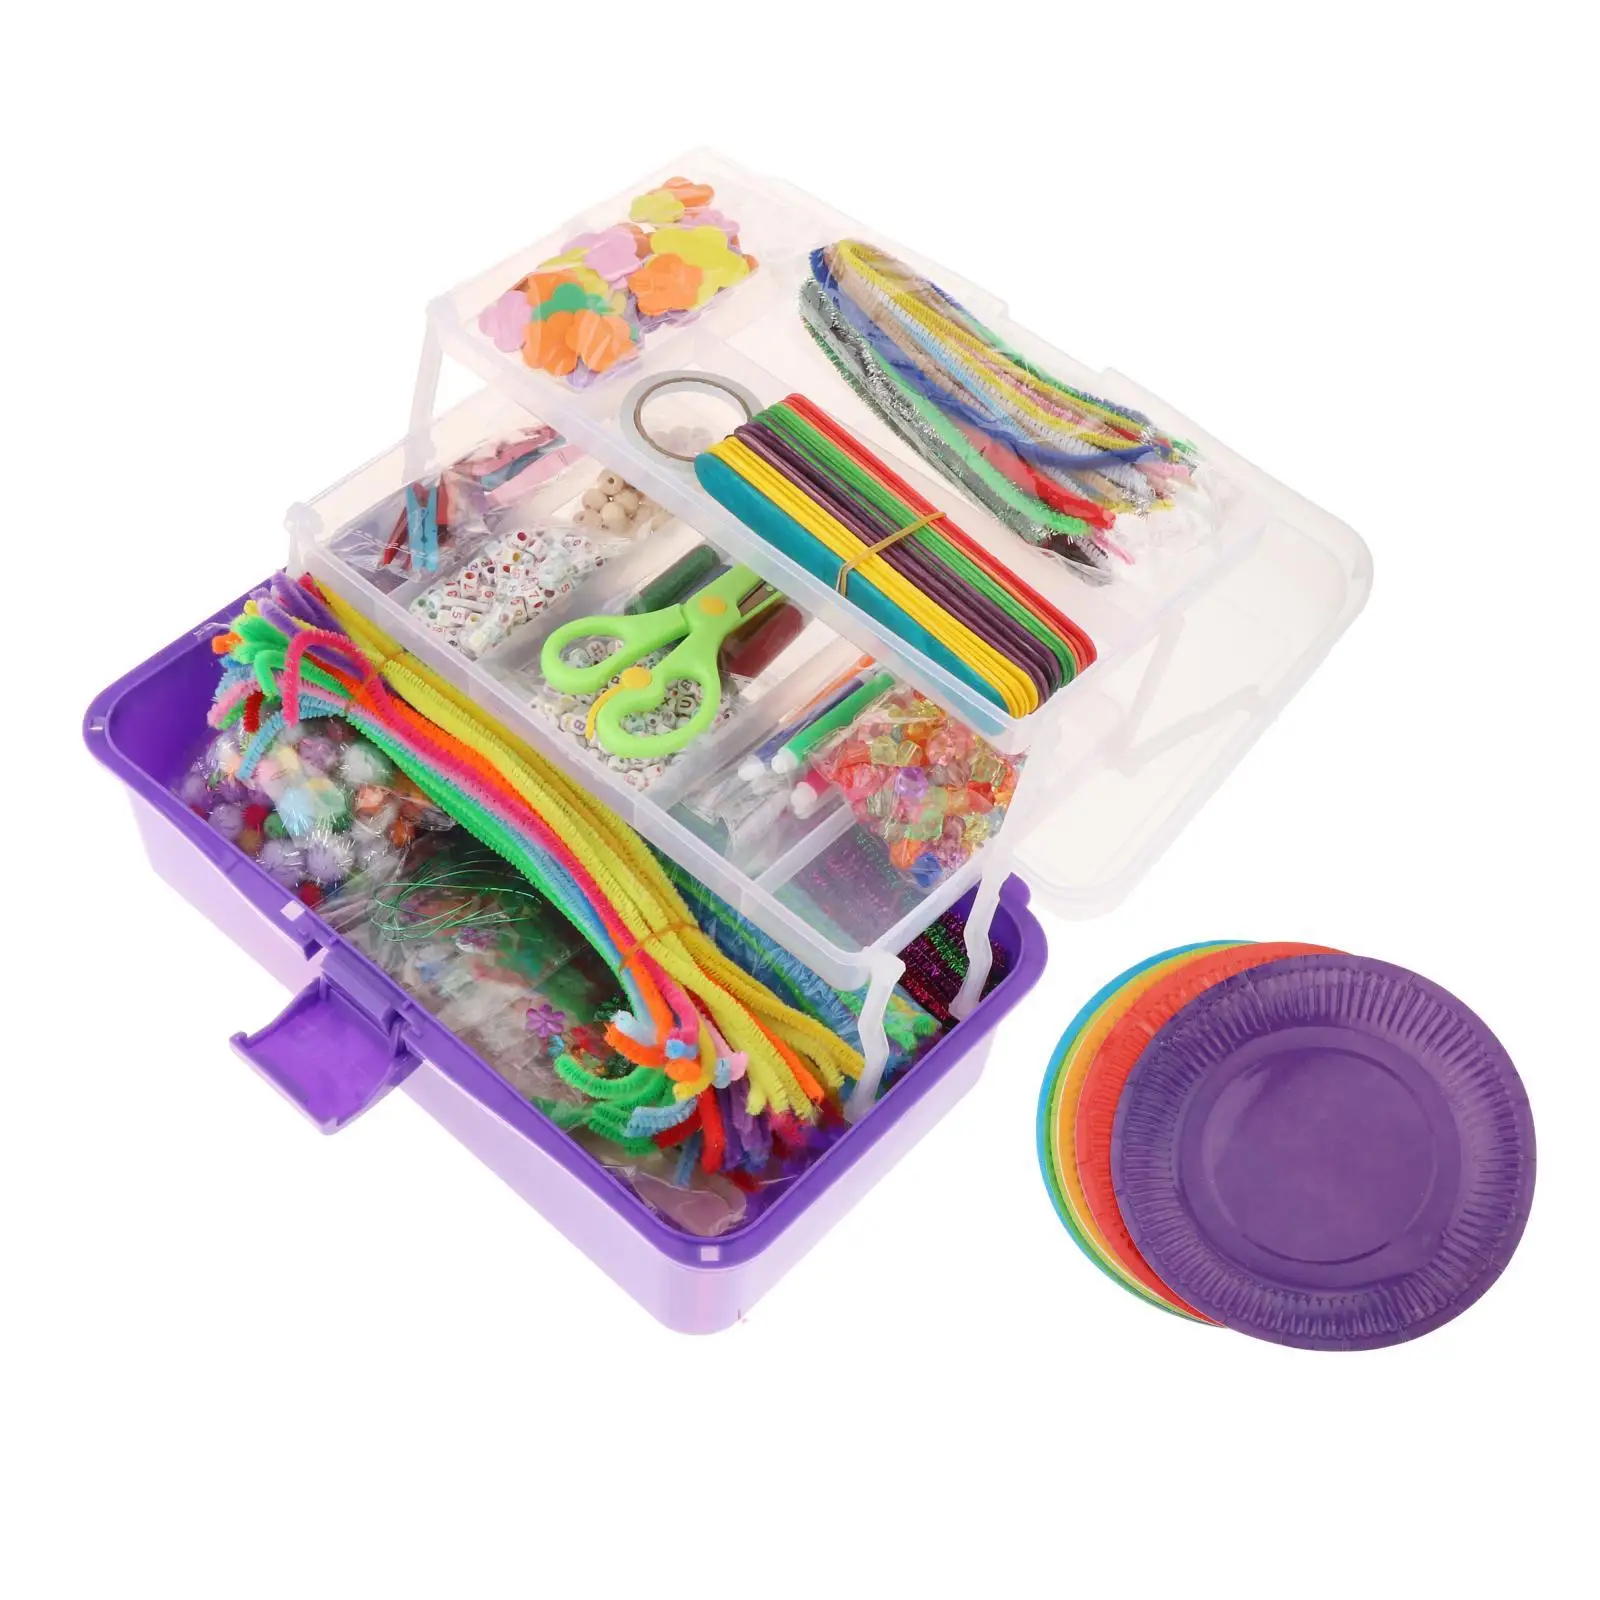   Crafts Supplies  Kit  with Storage Box for Holiday Gifts   Children Boys and Girls